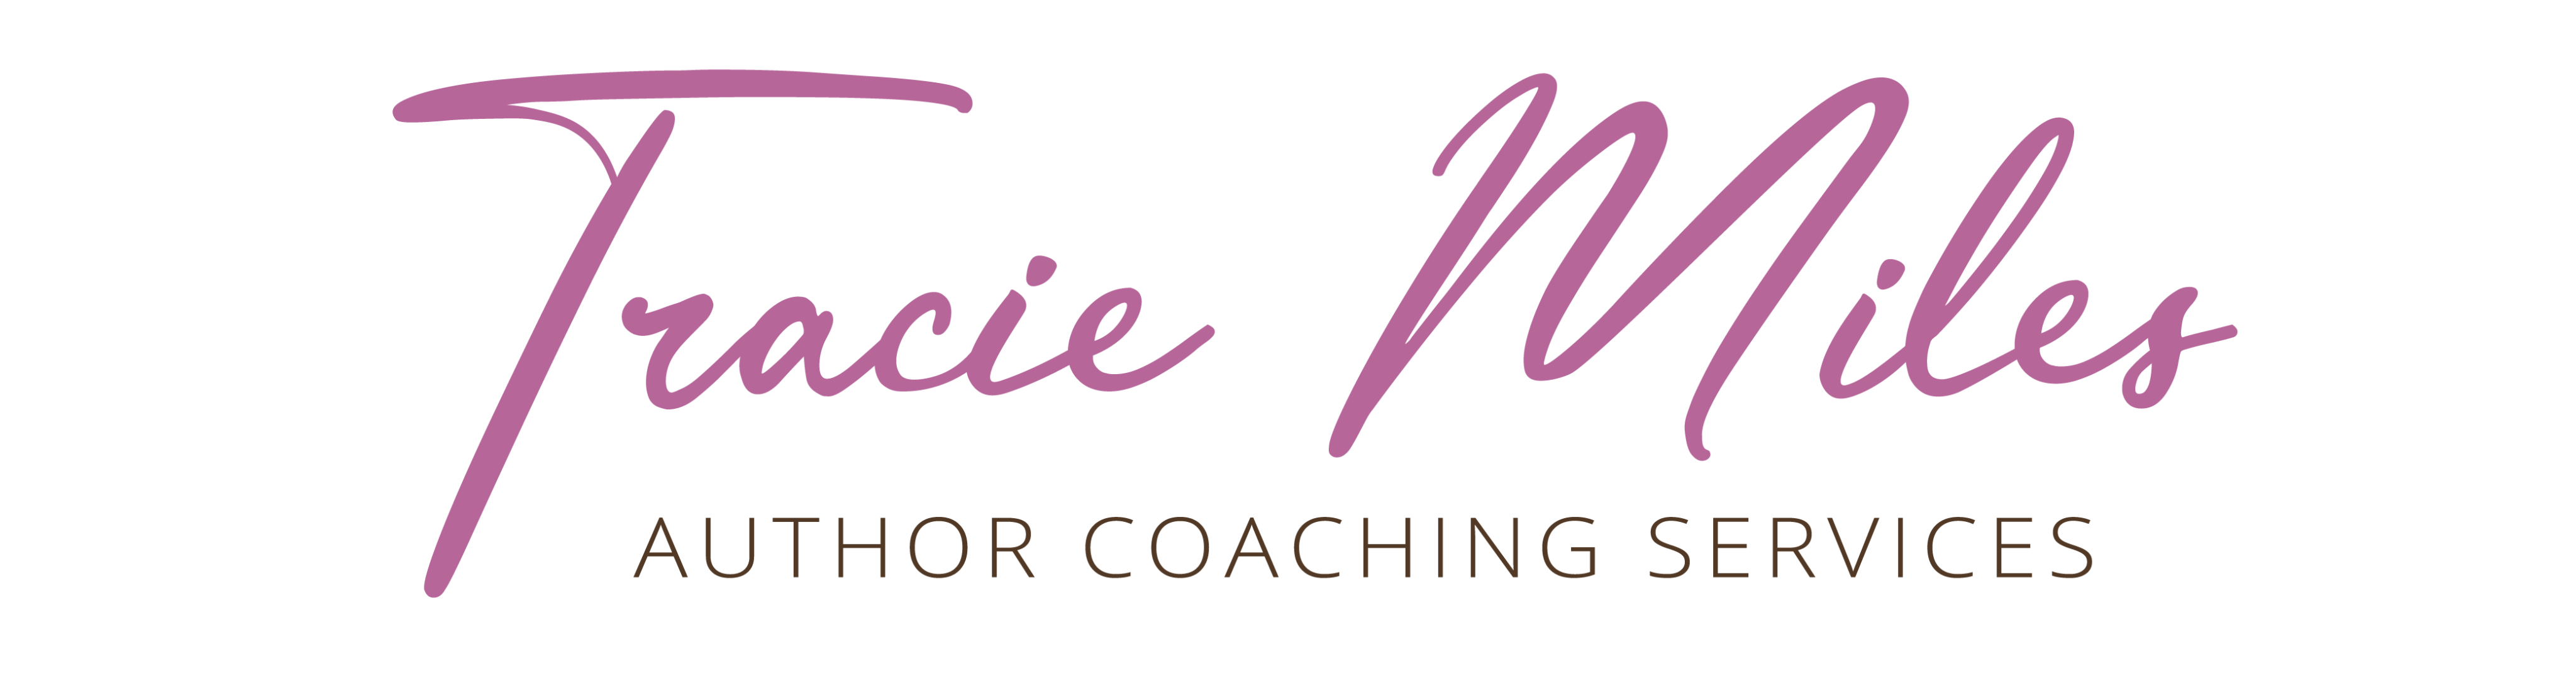 Tracie Miles - Author Coaching Services